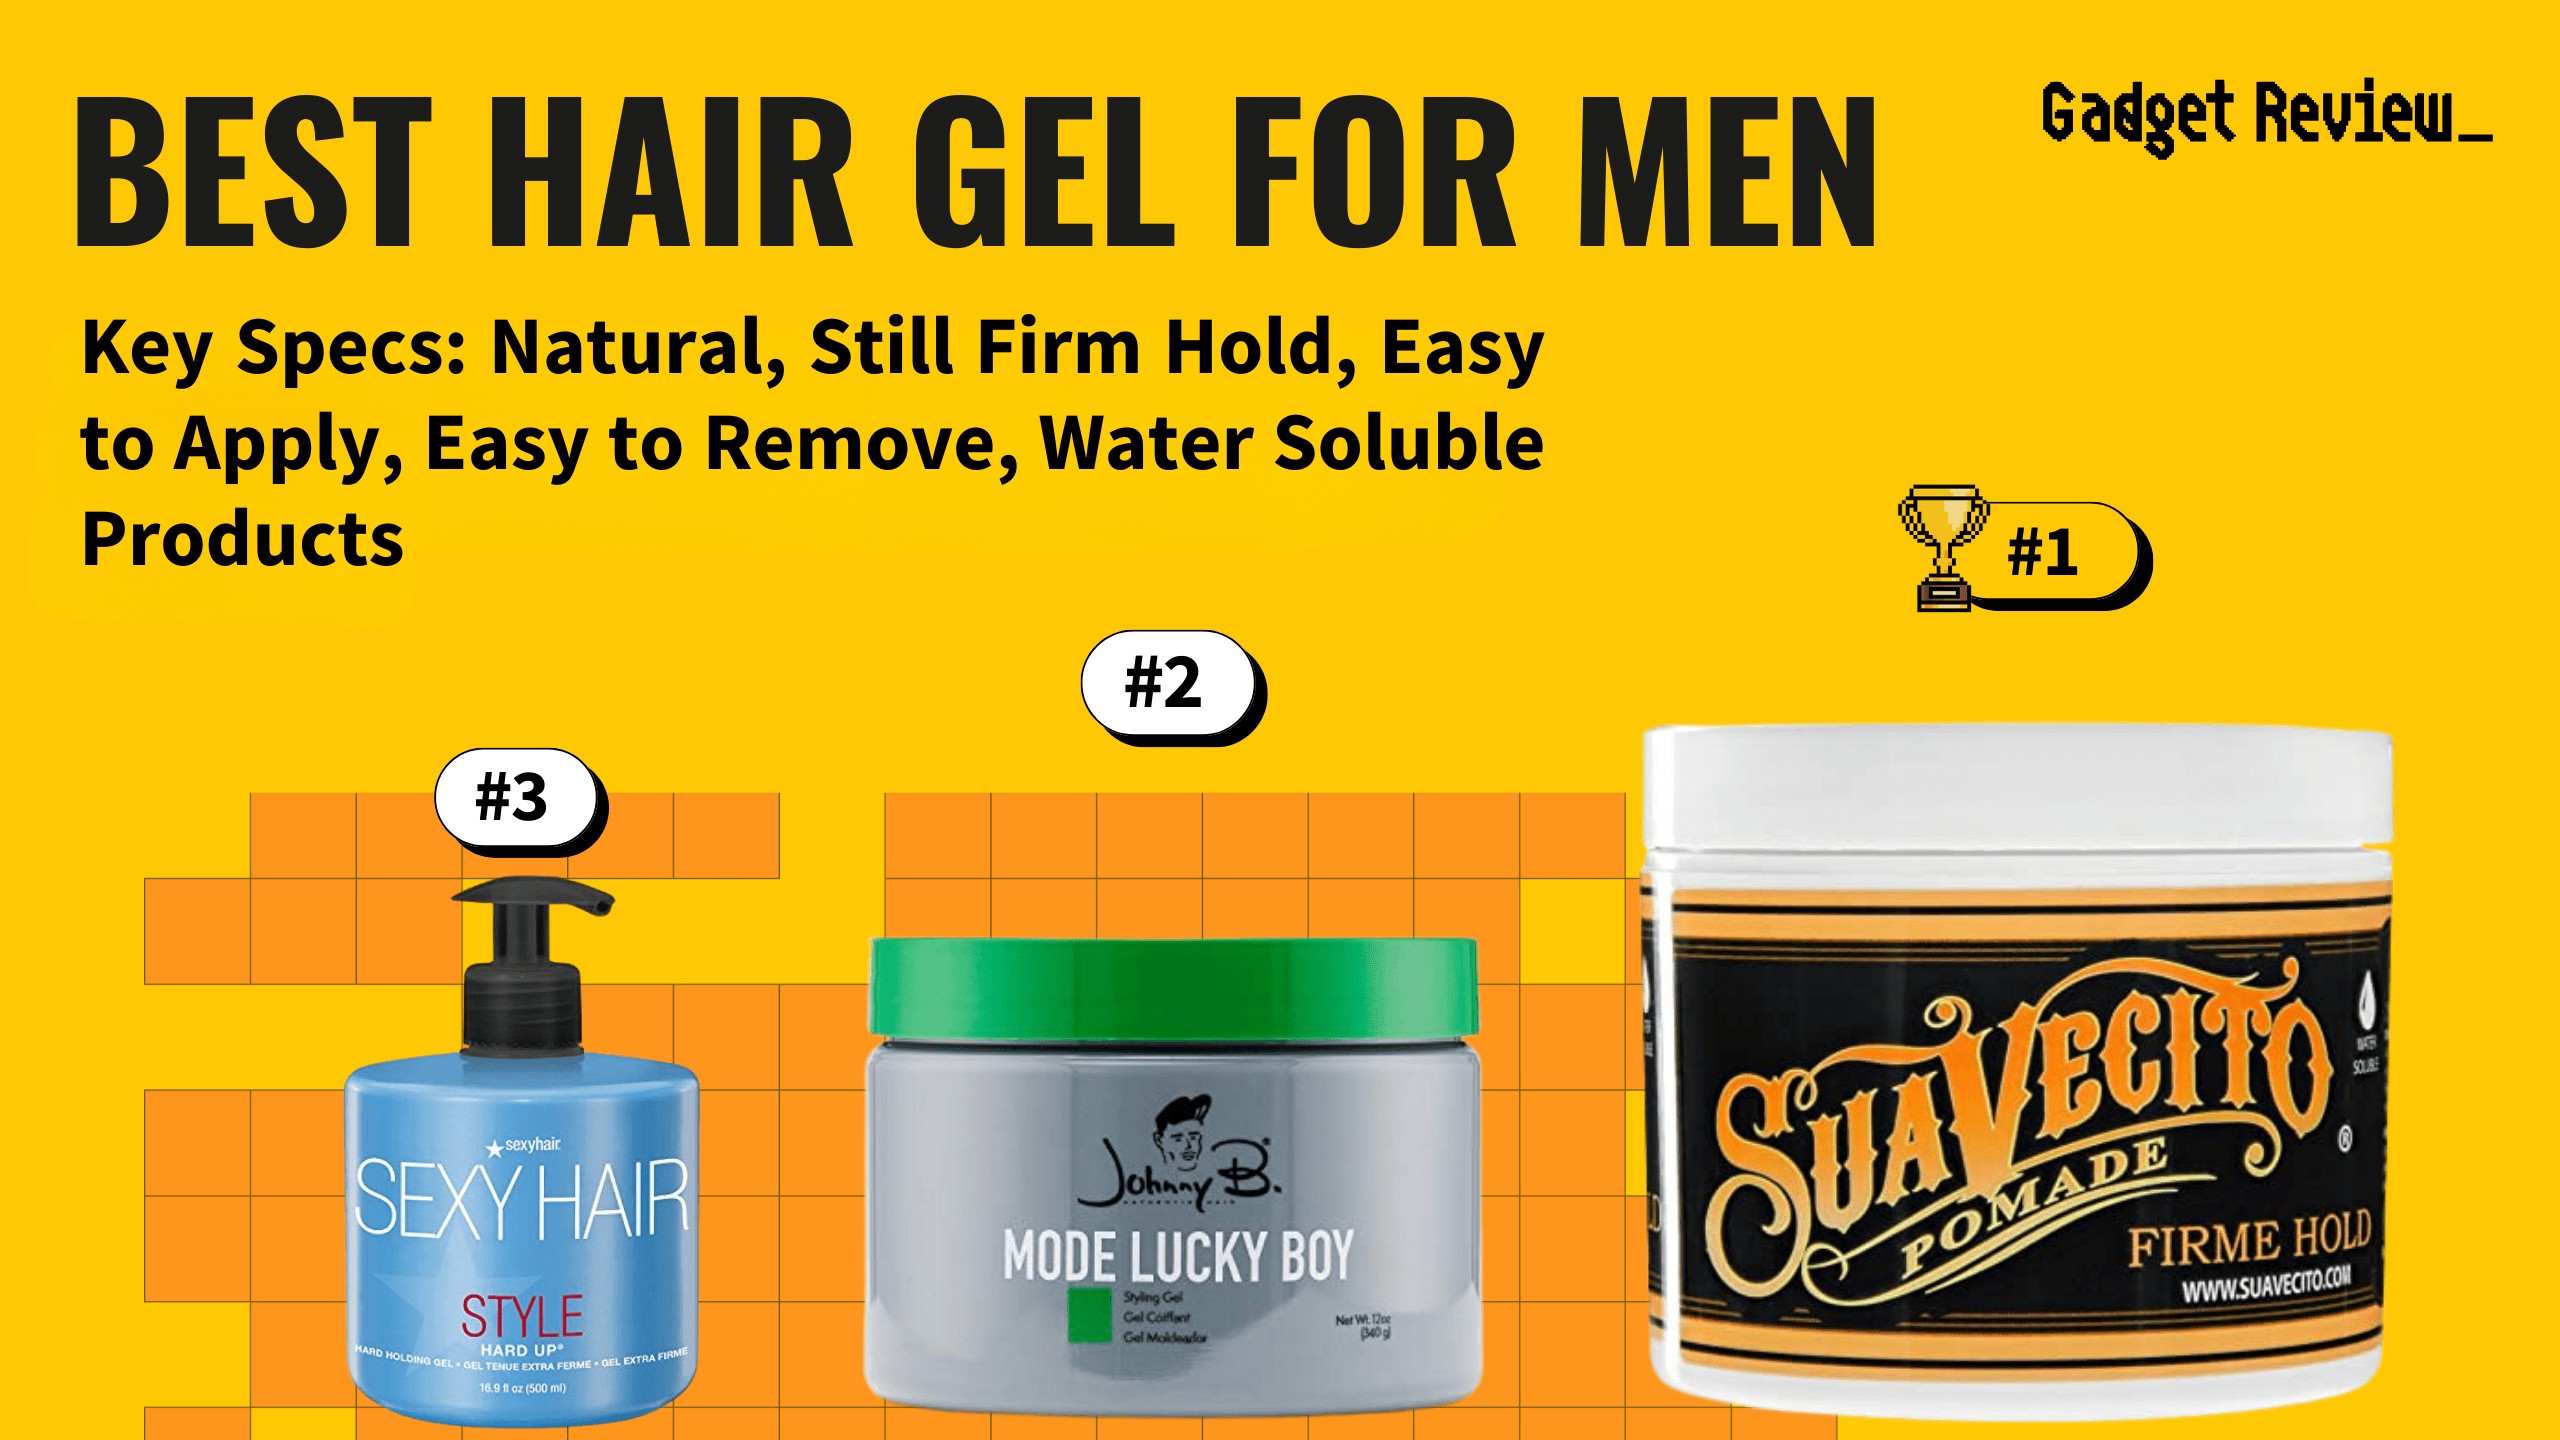 best hair gel for men featured image that shows the top three best bathroom essential models